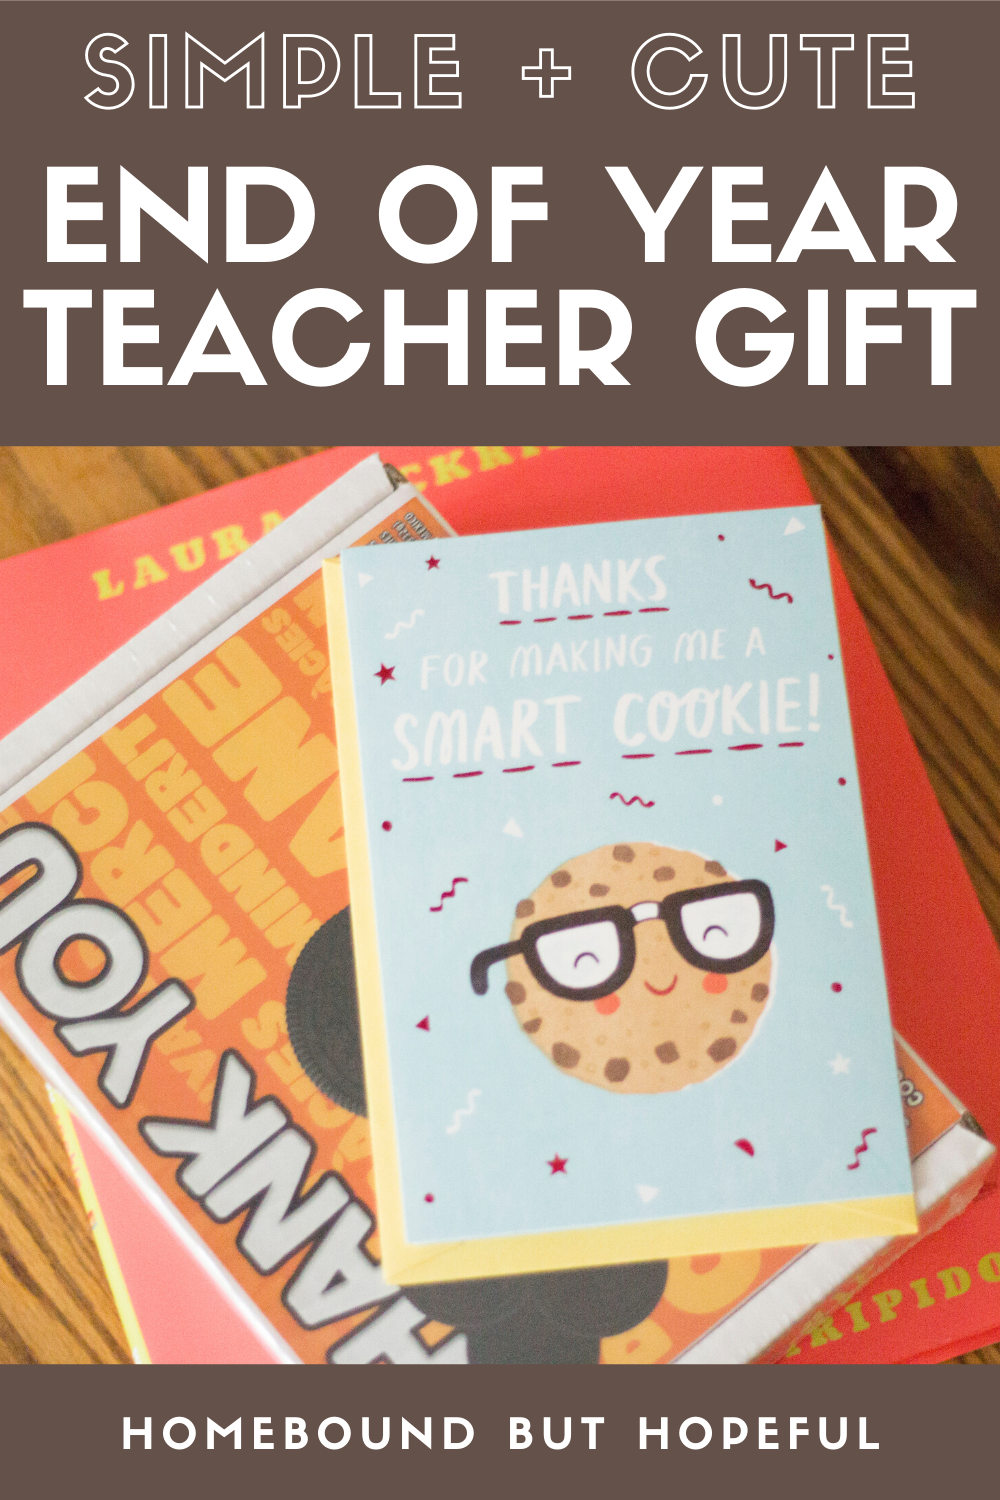 If you're still on the hunt for a simple, cute, and super-sweet end of year teacher gift, look no further! #teacherappreciation #thankateacher #teachergifts #teachergift #onesmartcookie